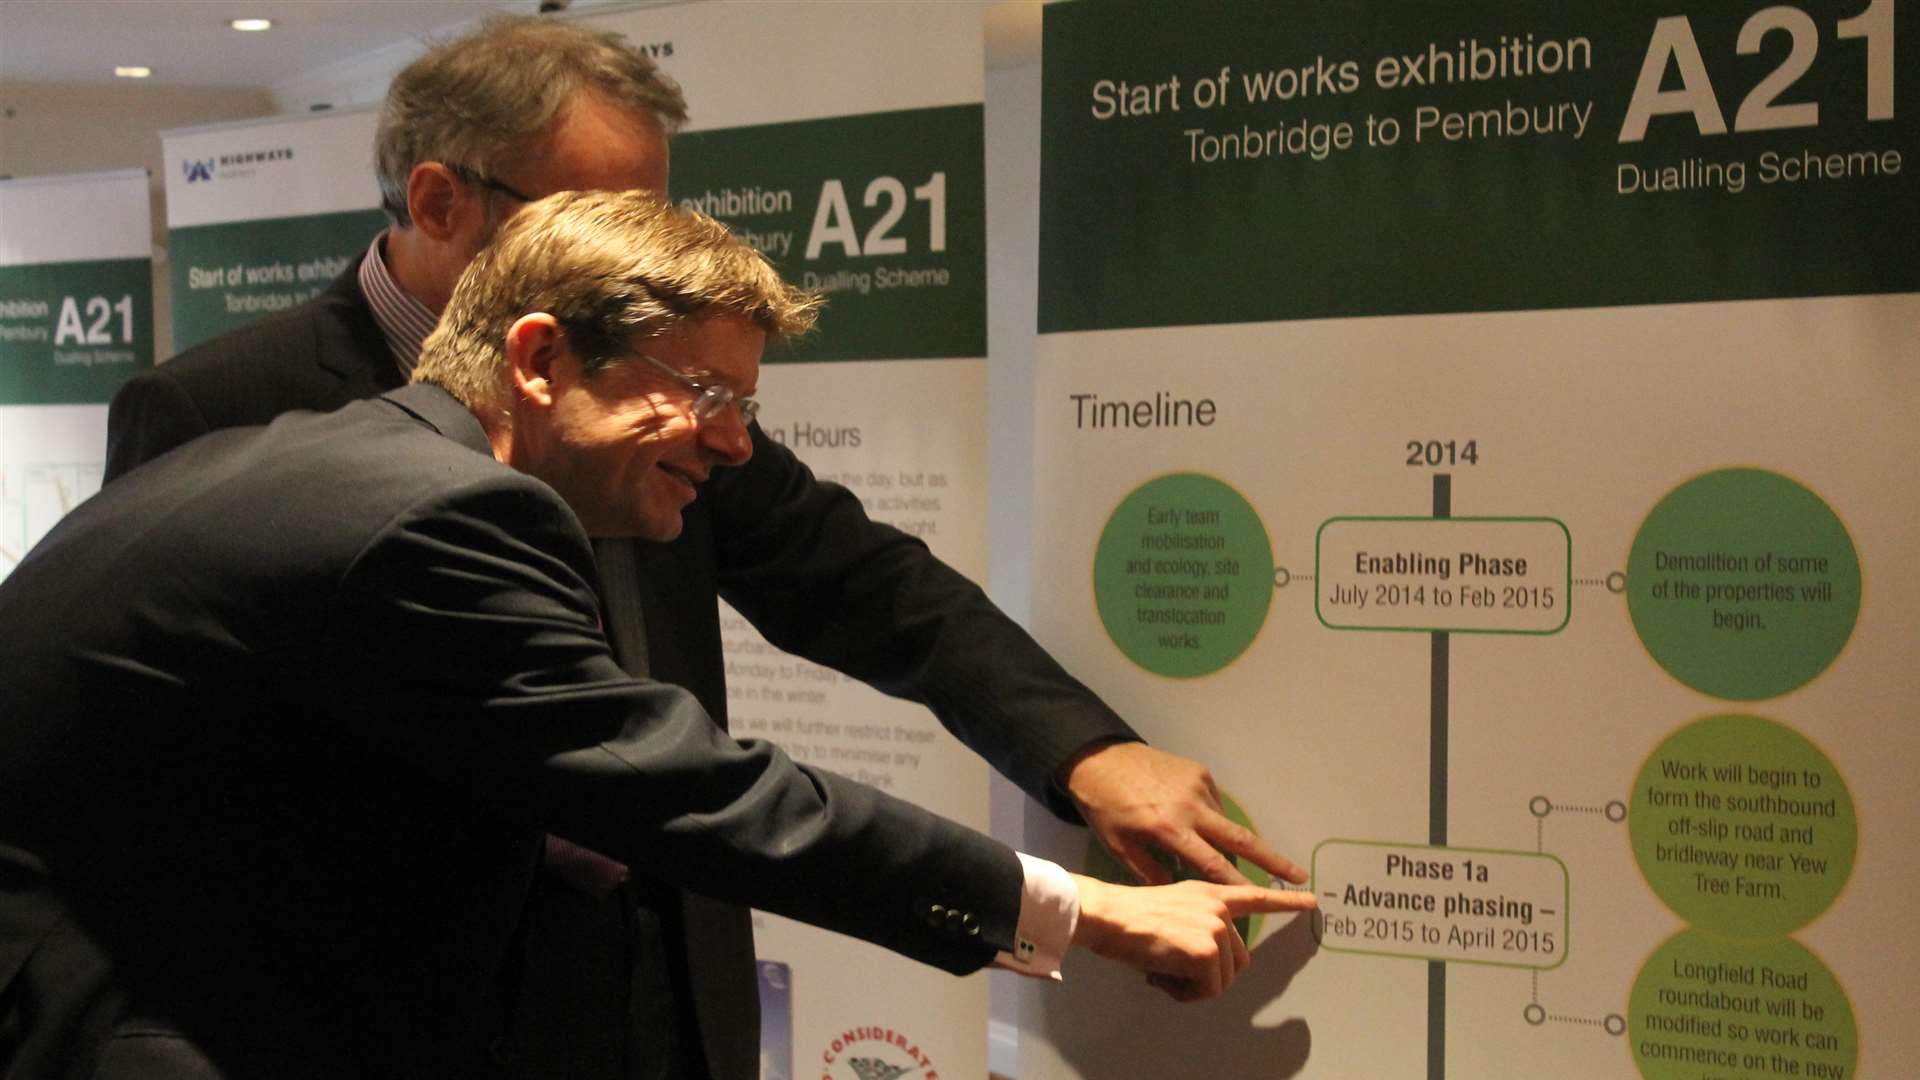 Greg Clark discusses the project timeline at the exhibition